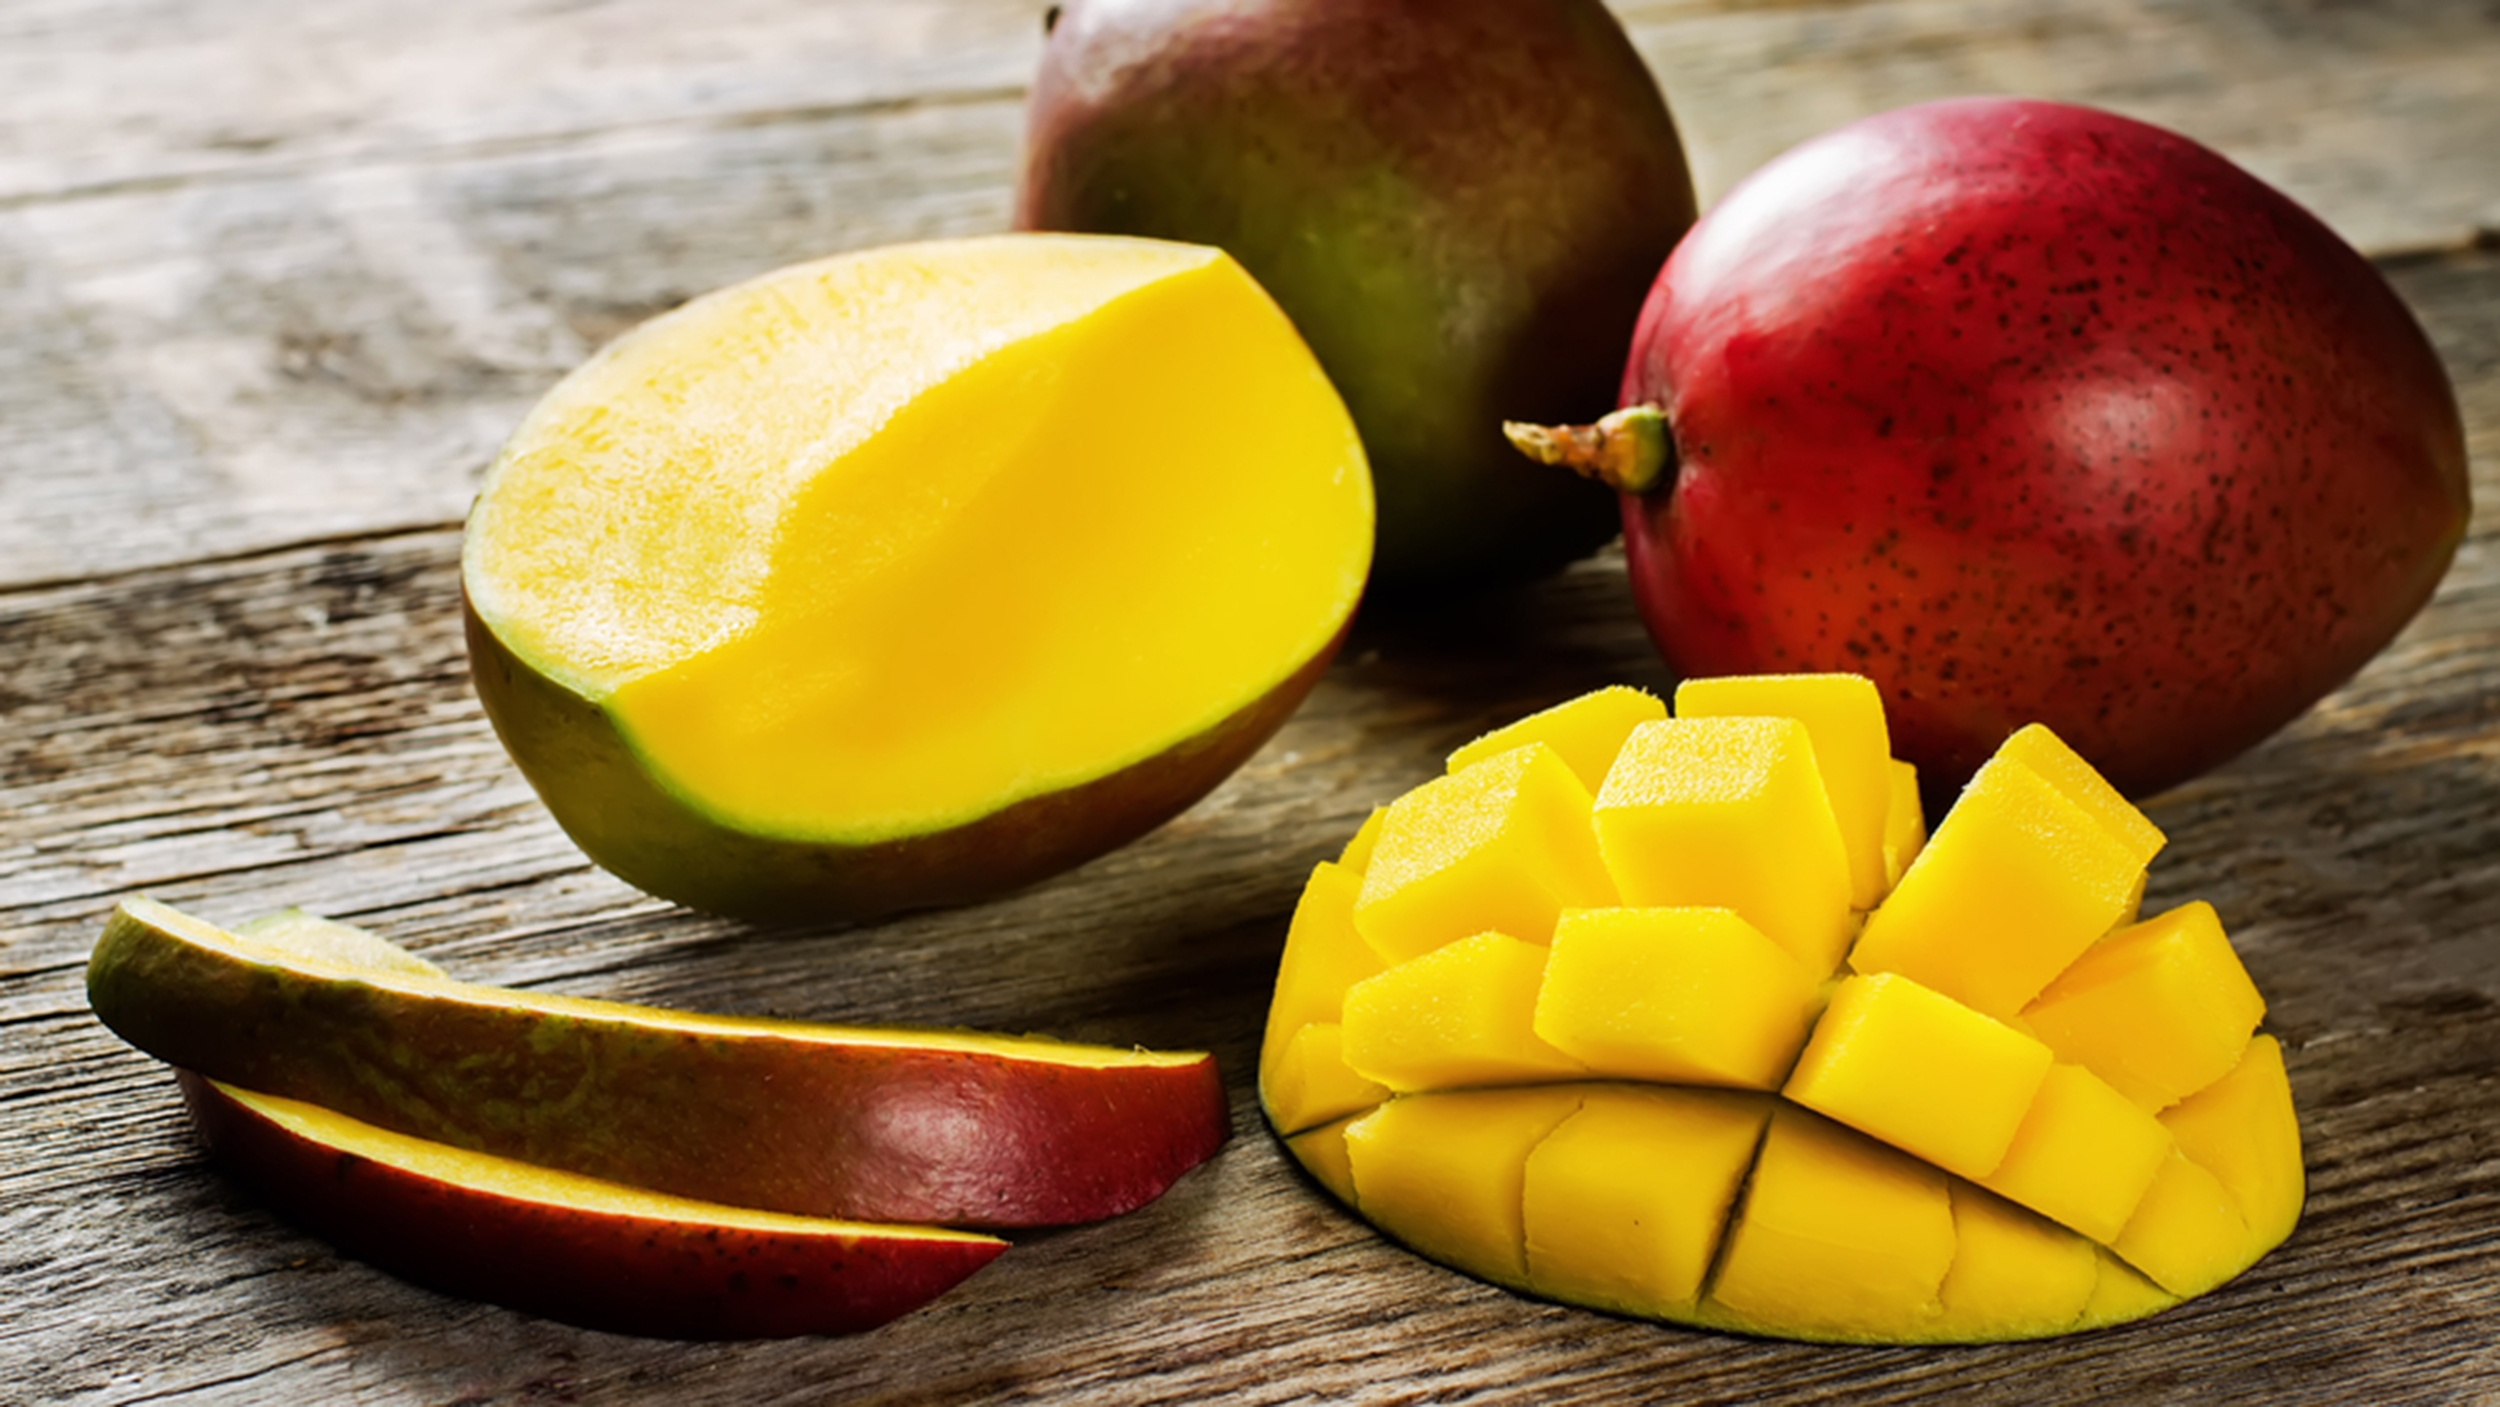 How to shop for, cut and prep mangoes, plus a mango salad - TODAY.com